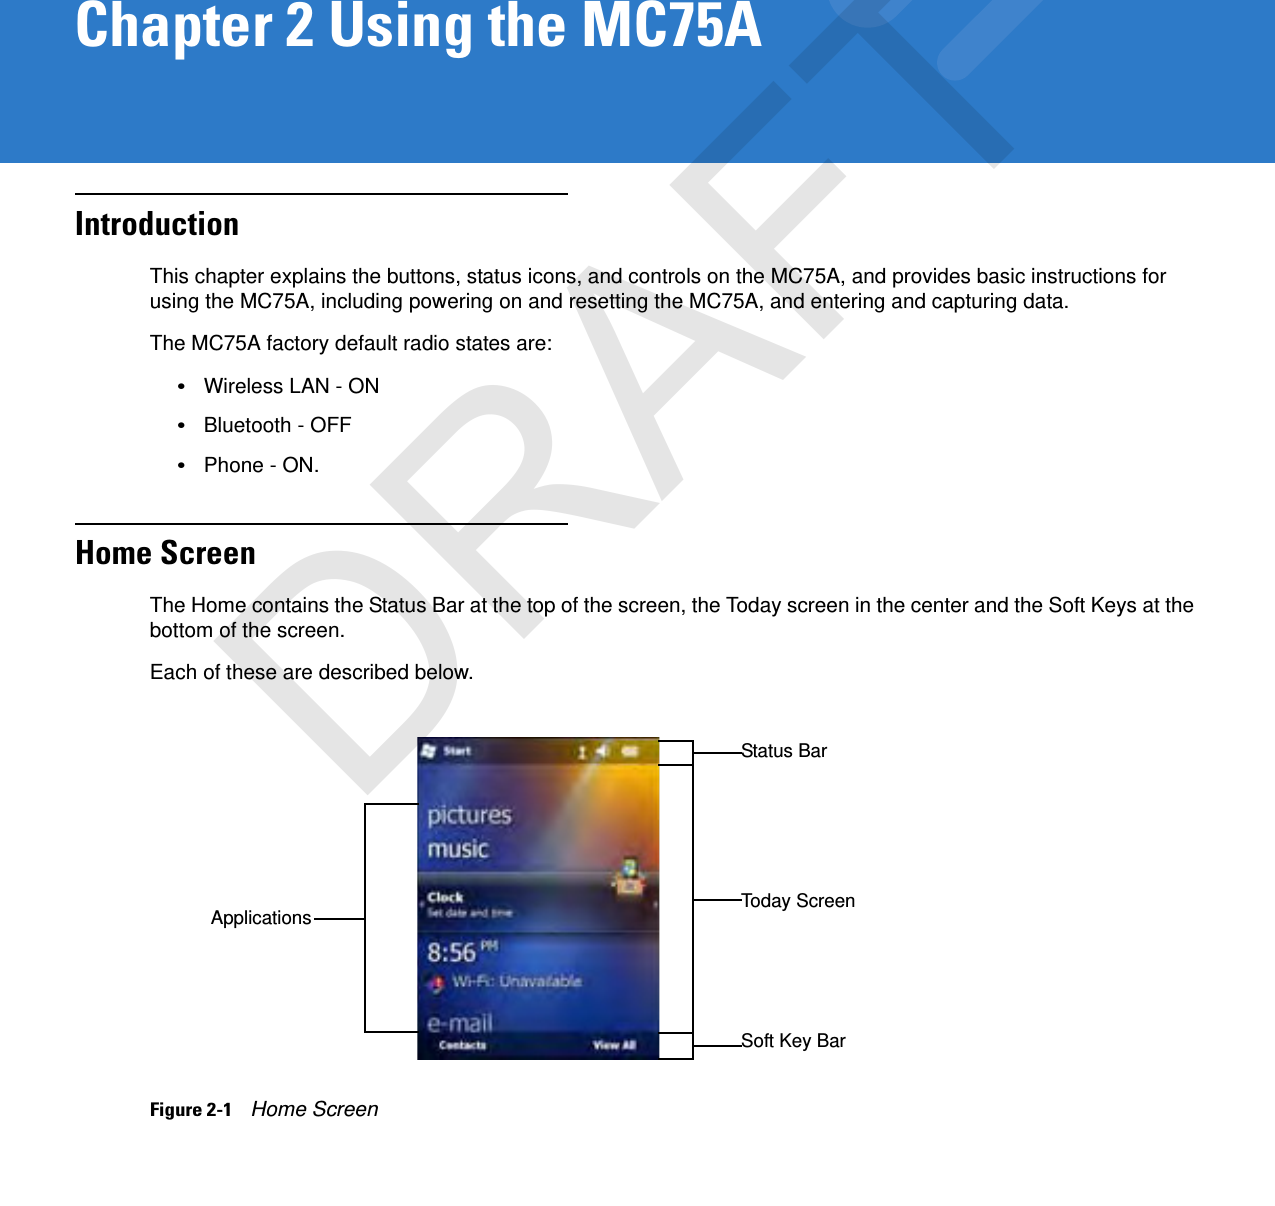 Chapter 2 Using the MC75AIntroductionThis chapter explains the buttons, status icons, and controls on the MC75A, and provides basic instructions for using the MC75A, including powering on and resetting the MC75A, and entering and capturing data.The MC75A factory default radio states are:•Wireless LAN - ON•Bluetooth - OFF•Phone - ON.Home ScreenThe Home contains the Status Bar at the top of the screen, the Today screen in the center and the Soft Keys at the bottom of the screen.Each of these are described below.Figure 2-1    Home ScreenSoft Key BarStatus BarApplications Today ScreenDRAFT